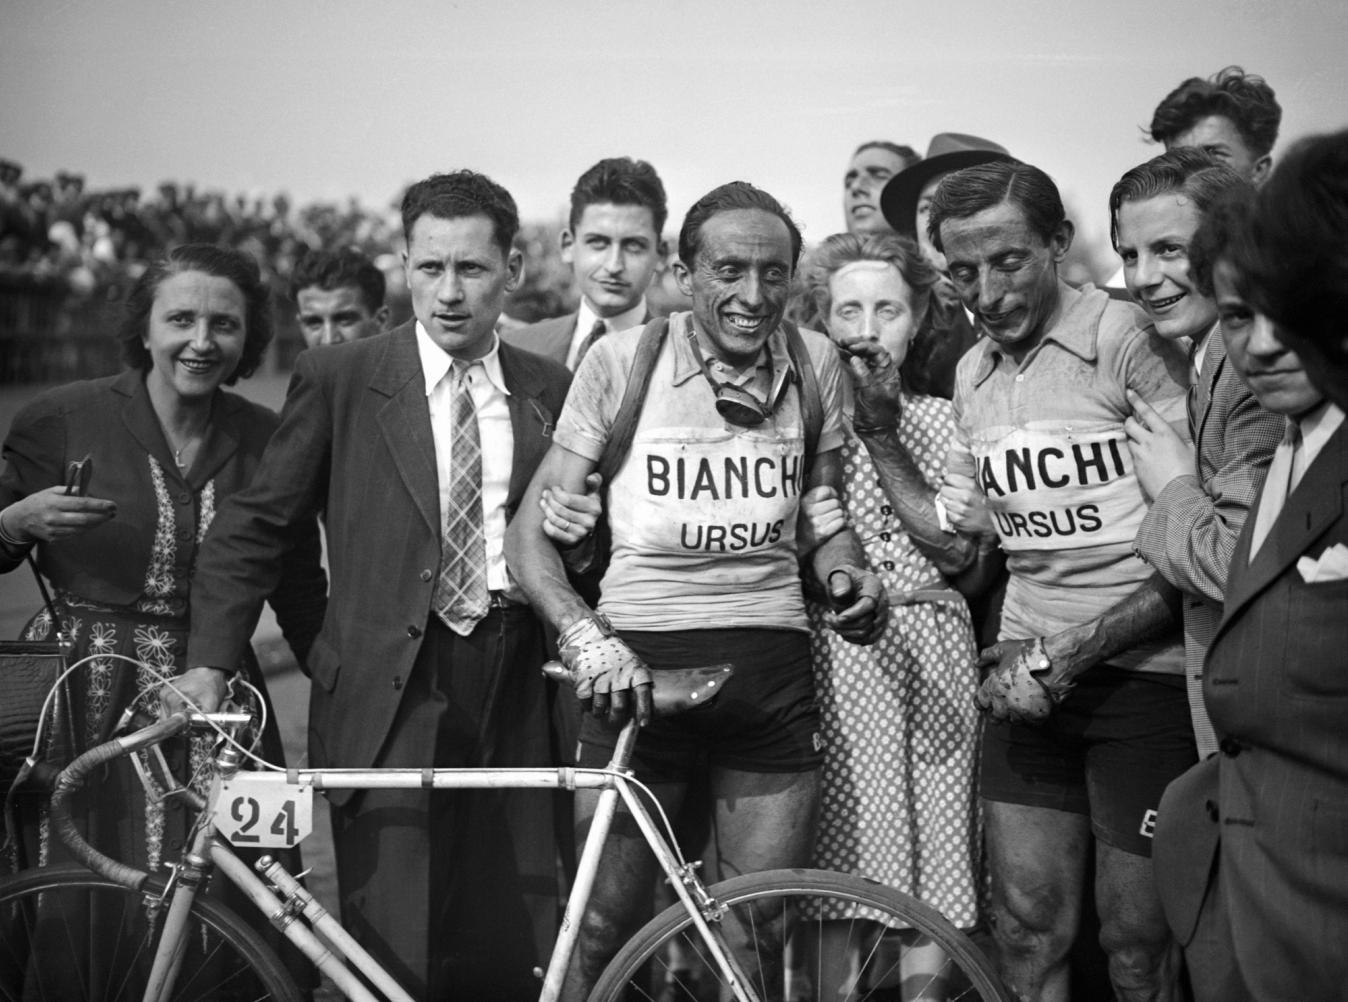 Serse Coppi (left) was a loyal gregario to his brother Fausto (right) throughout their careers, but Serse enjoyed his own moment of glory at the 1949 Paris-Roubaix